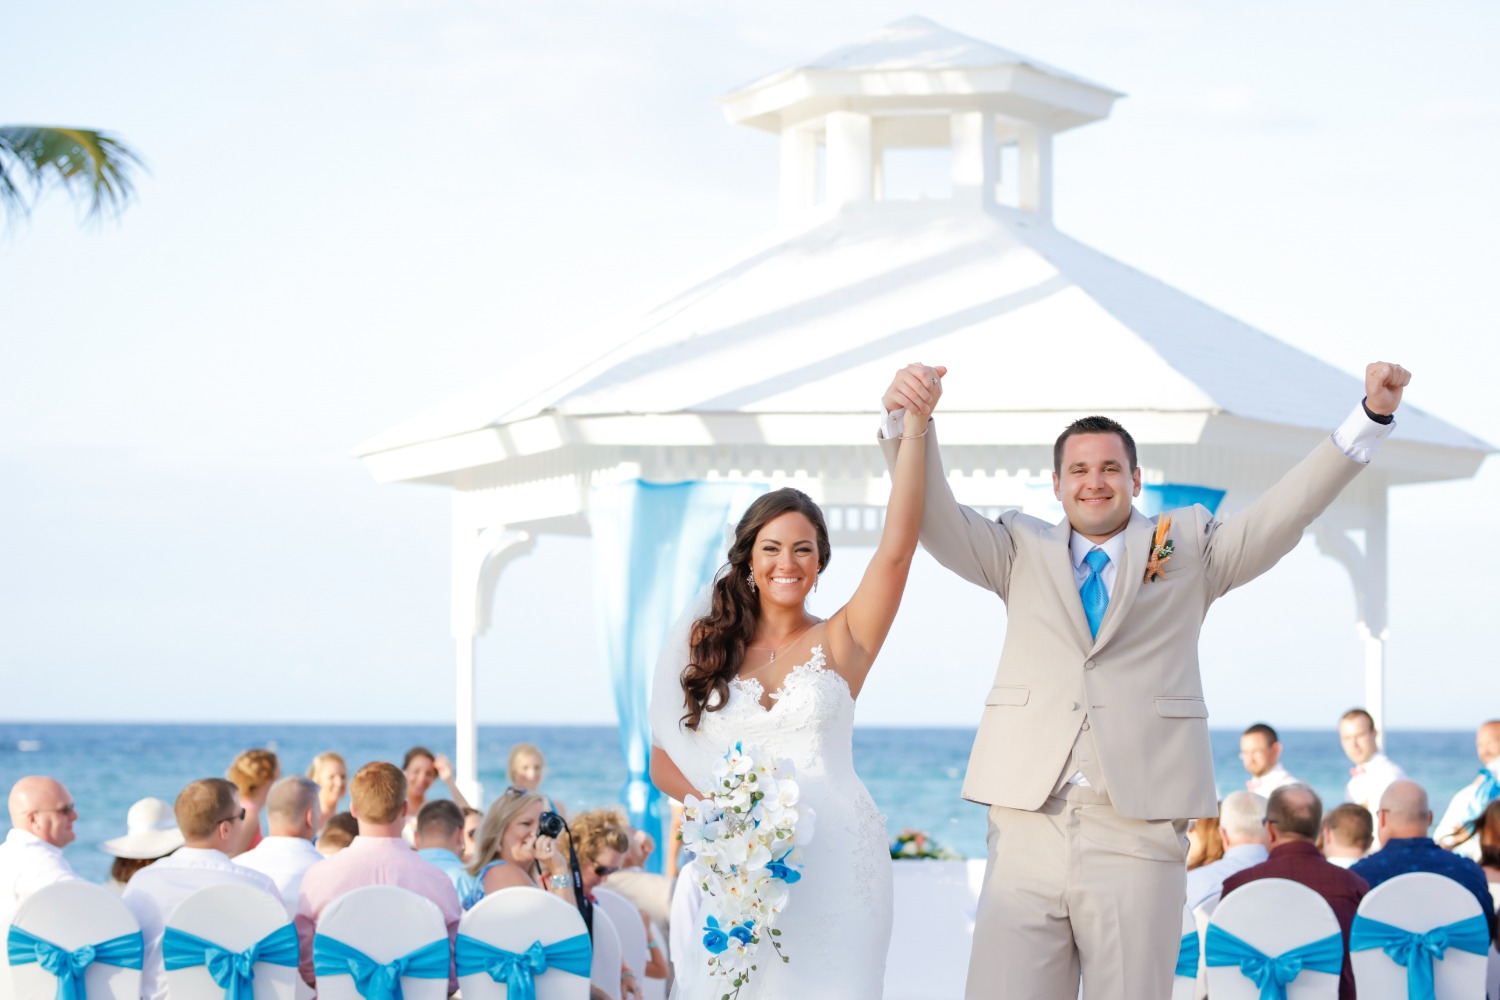 Say Yes to Destination Wedding in Punta Cana Via Apple Vacations